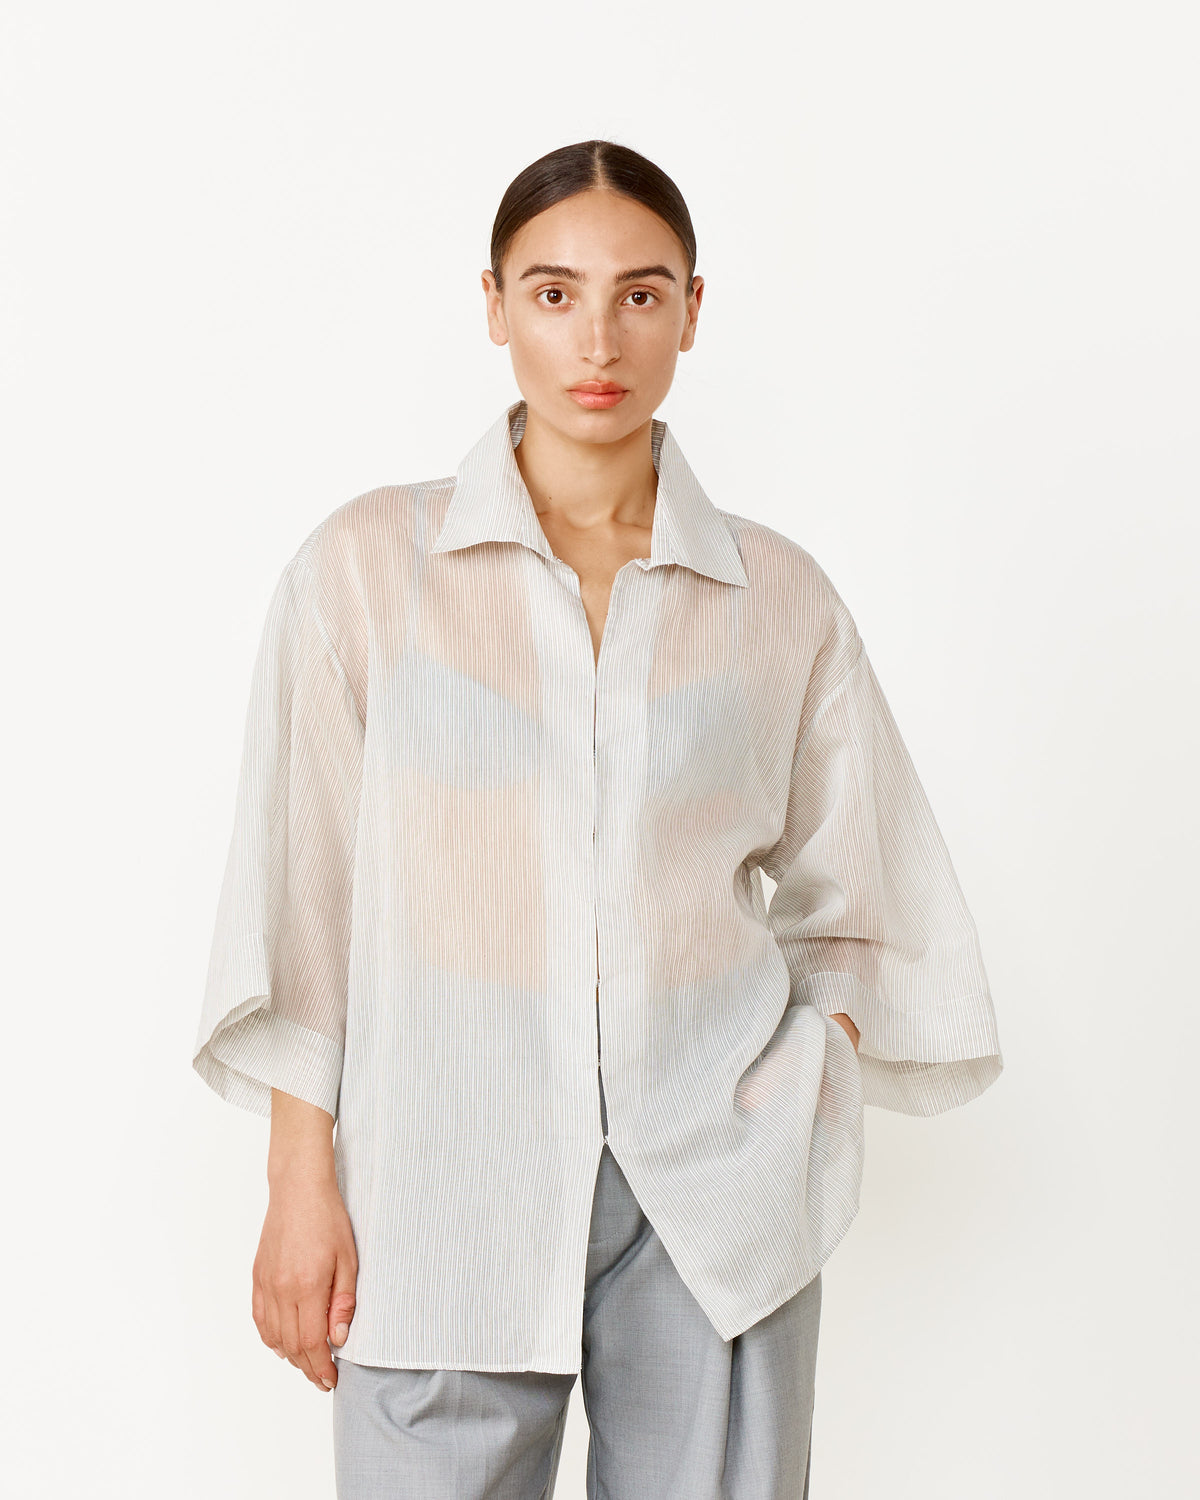 Find out the latest news on Oversized Shirt in Sheer Stripe St. Agni